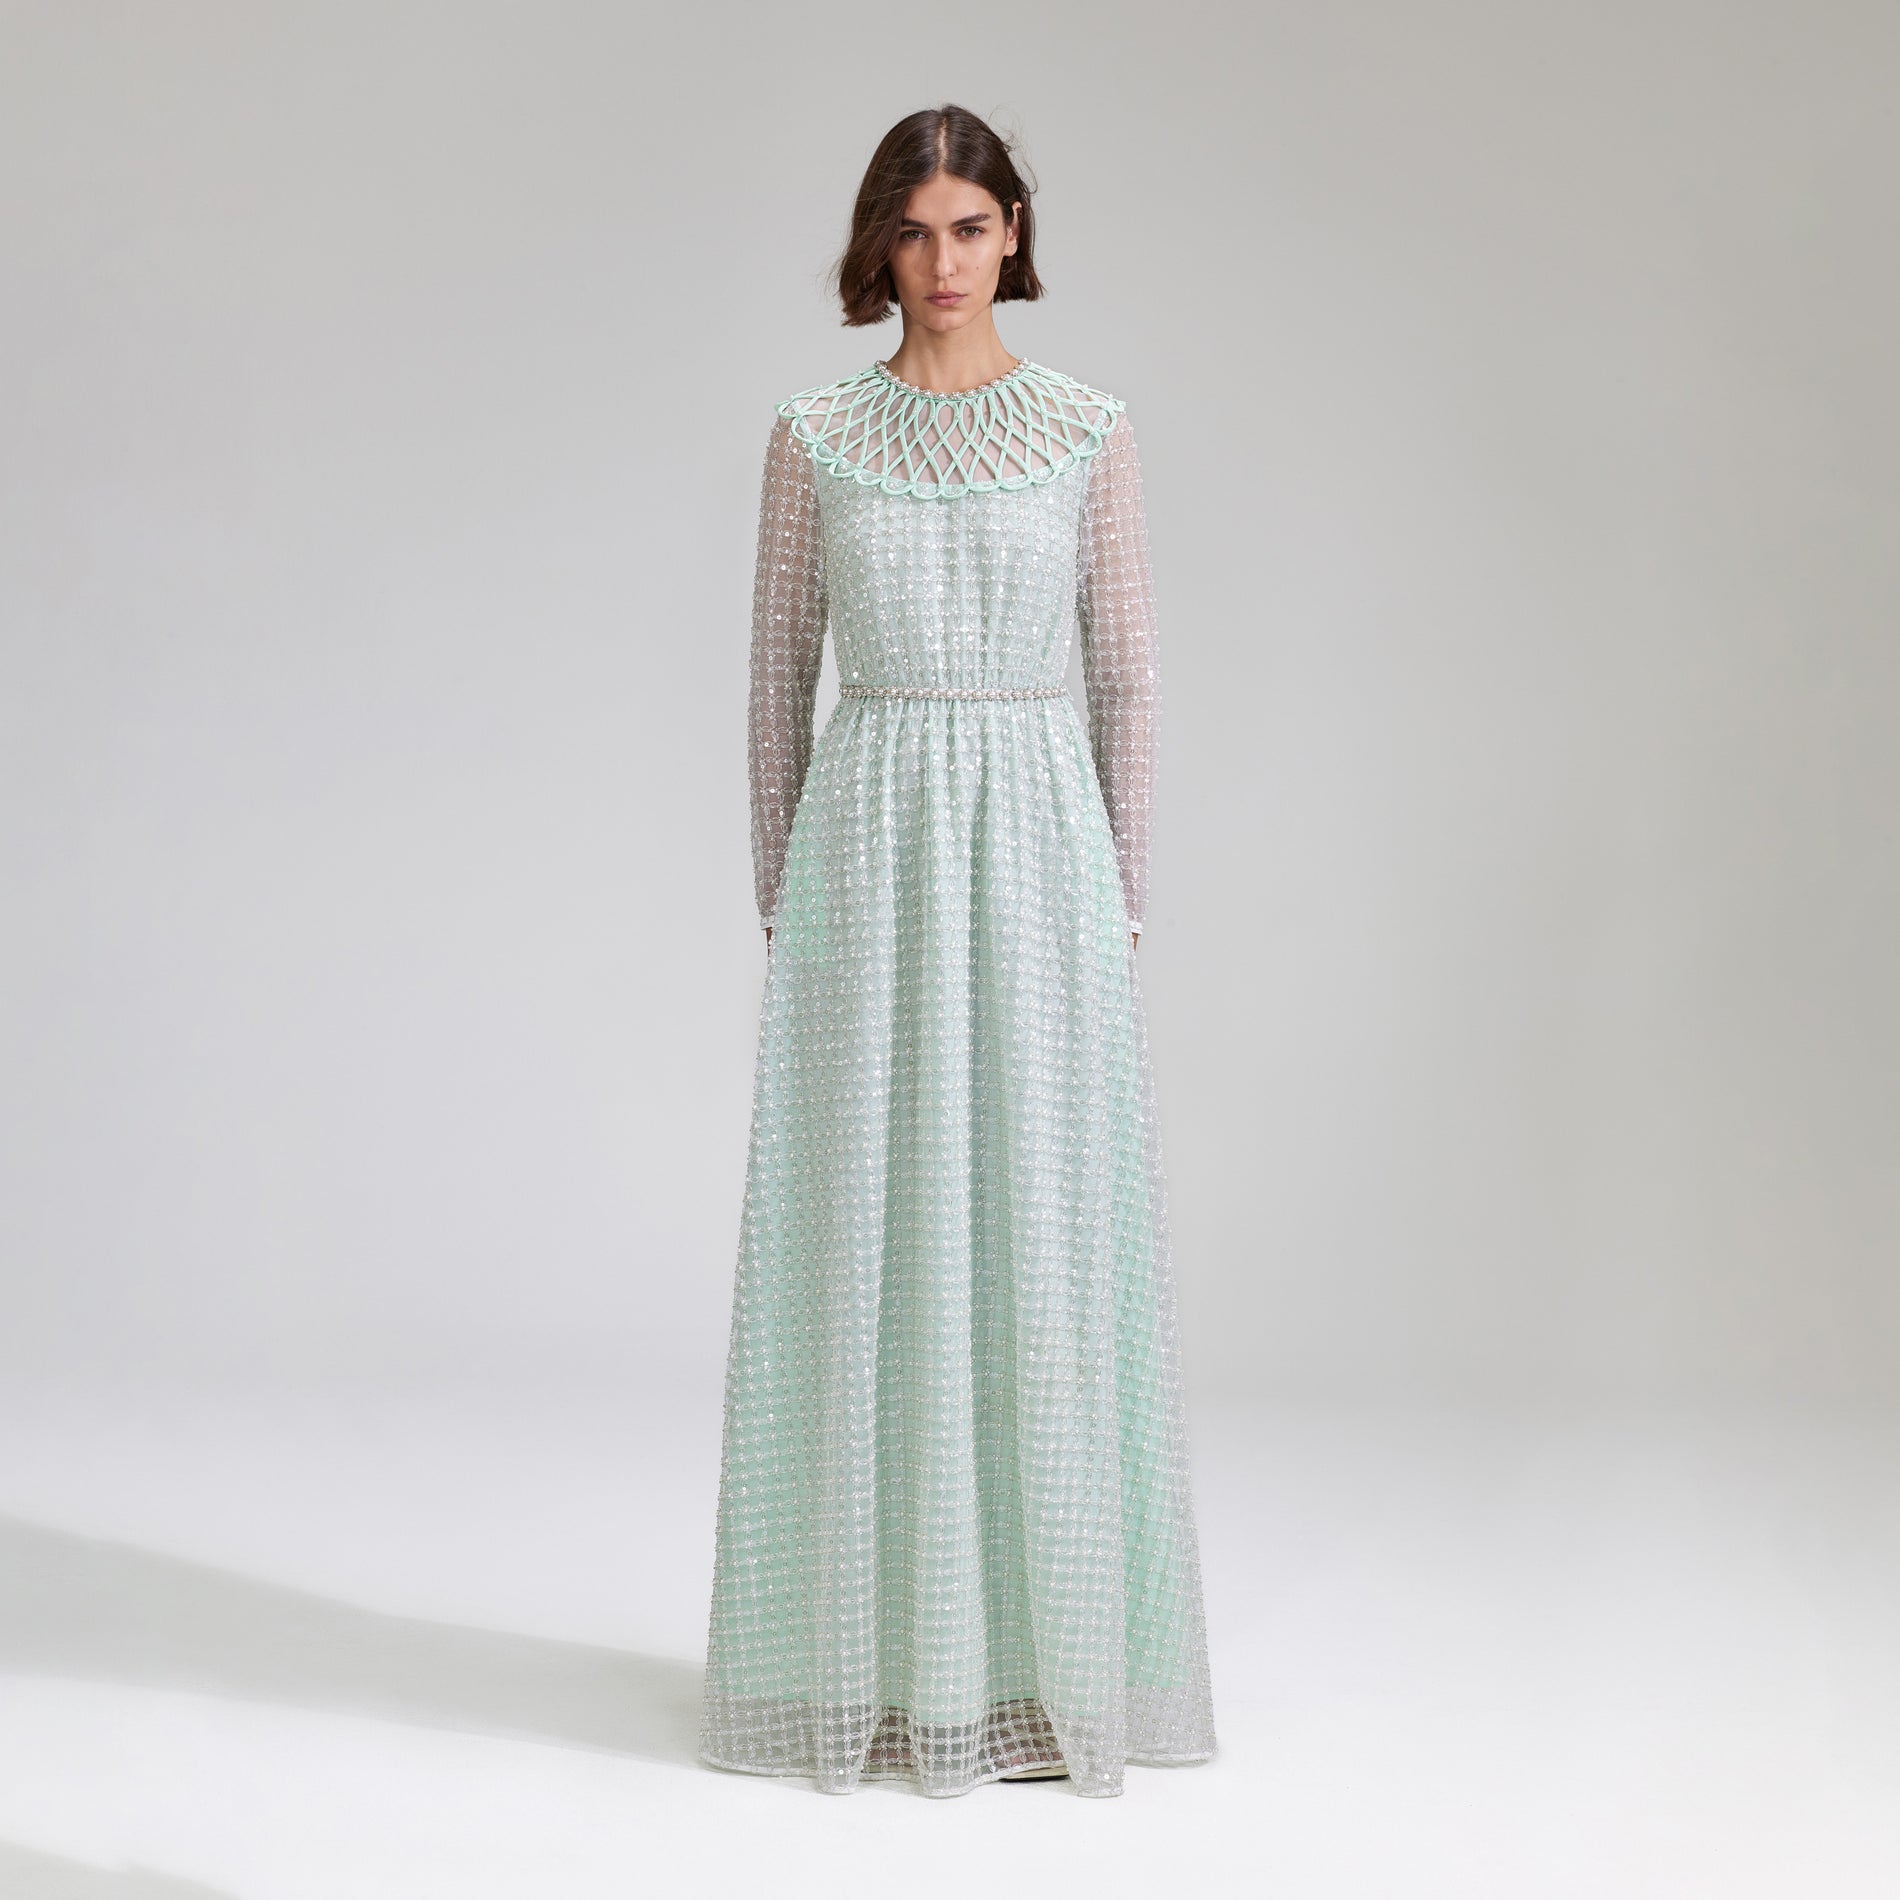 A woman wearing the Mint Grid Sequin Pearl Maxi Dress